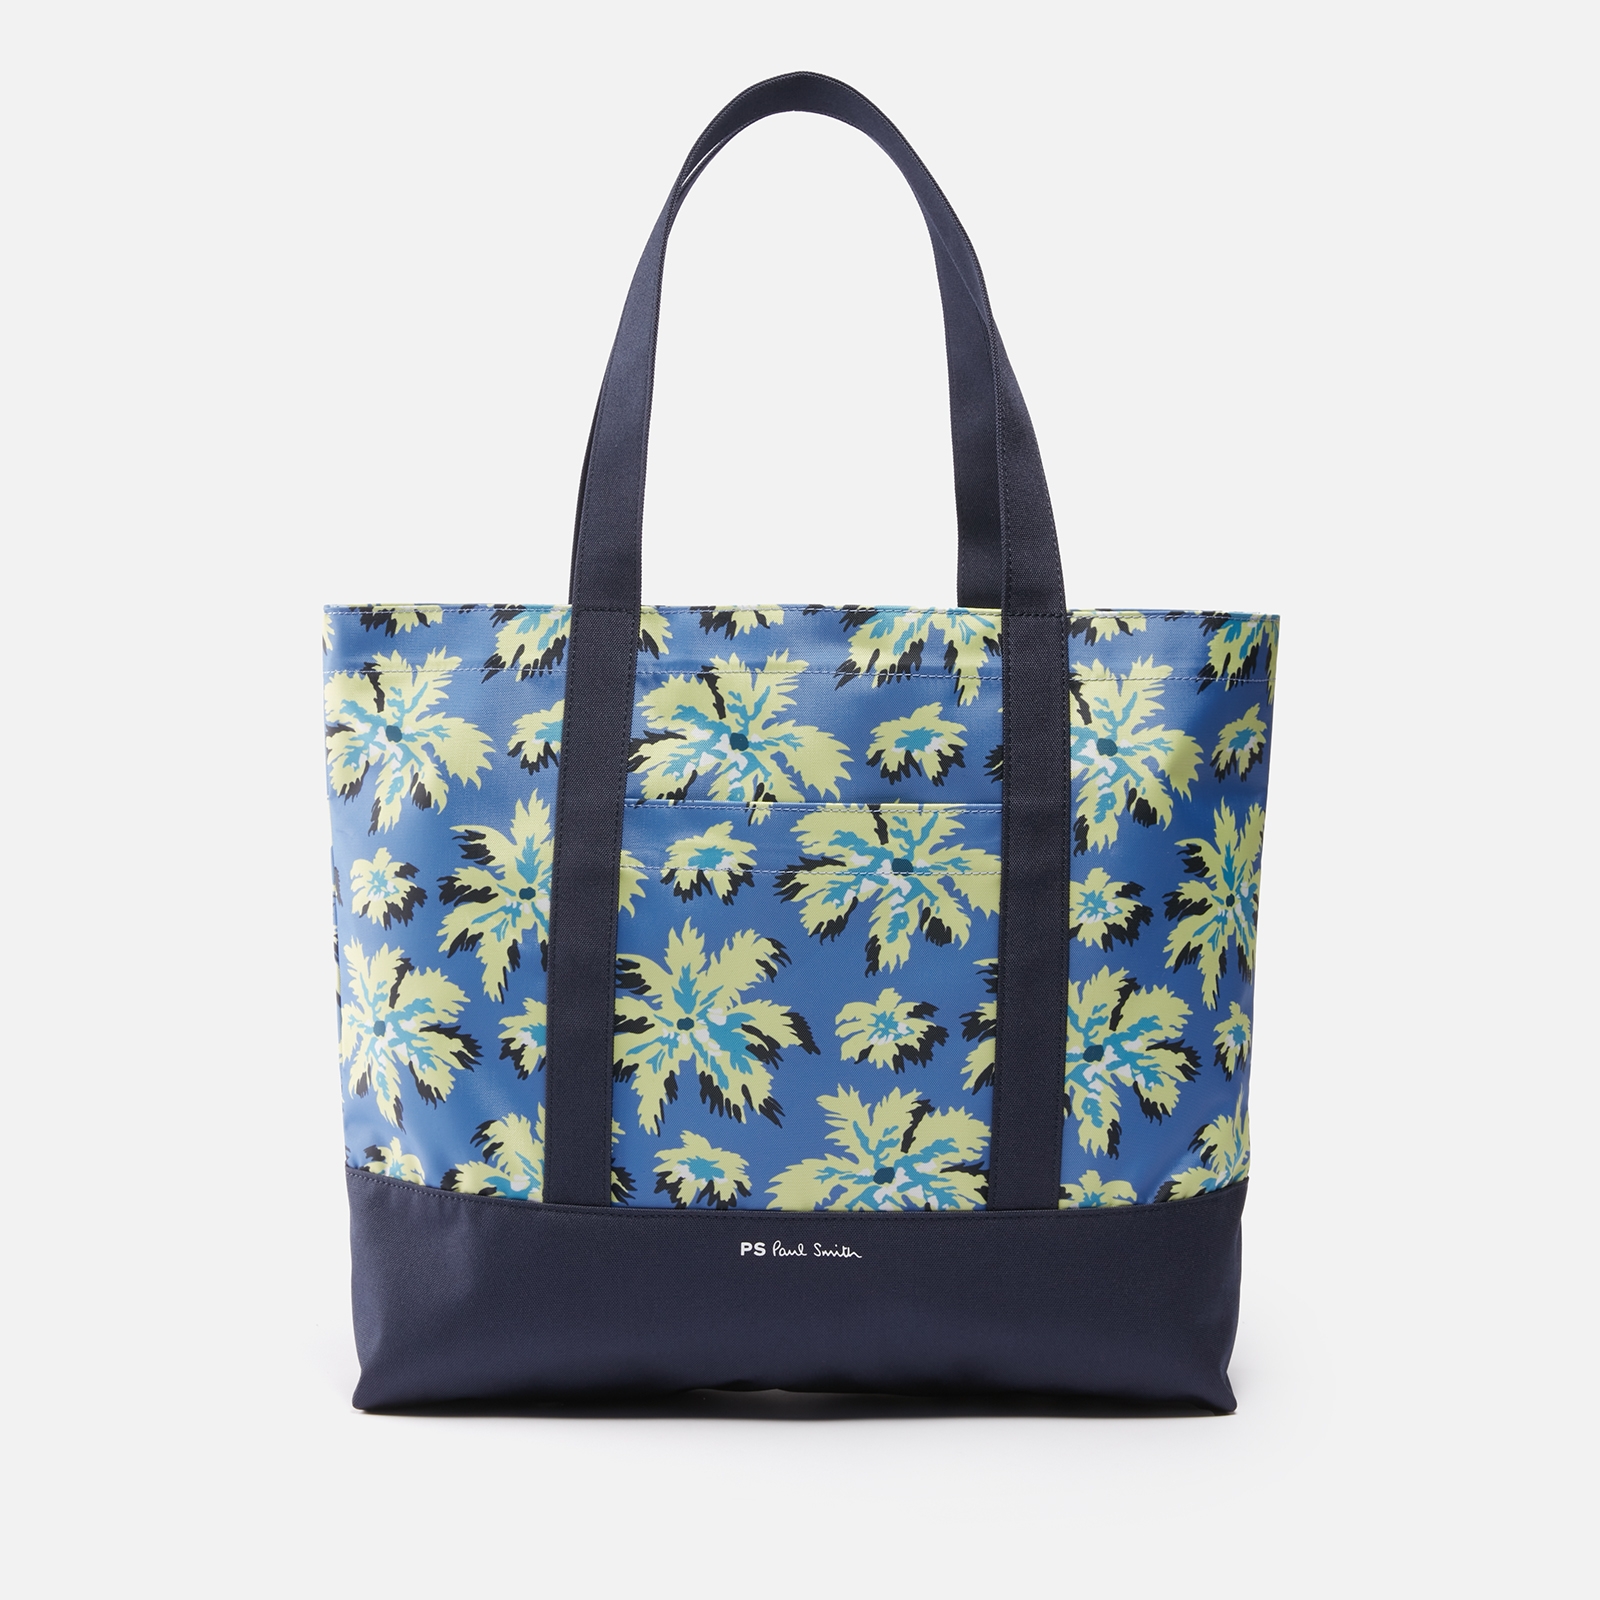 Paul Smith Canvas Tote Bag